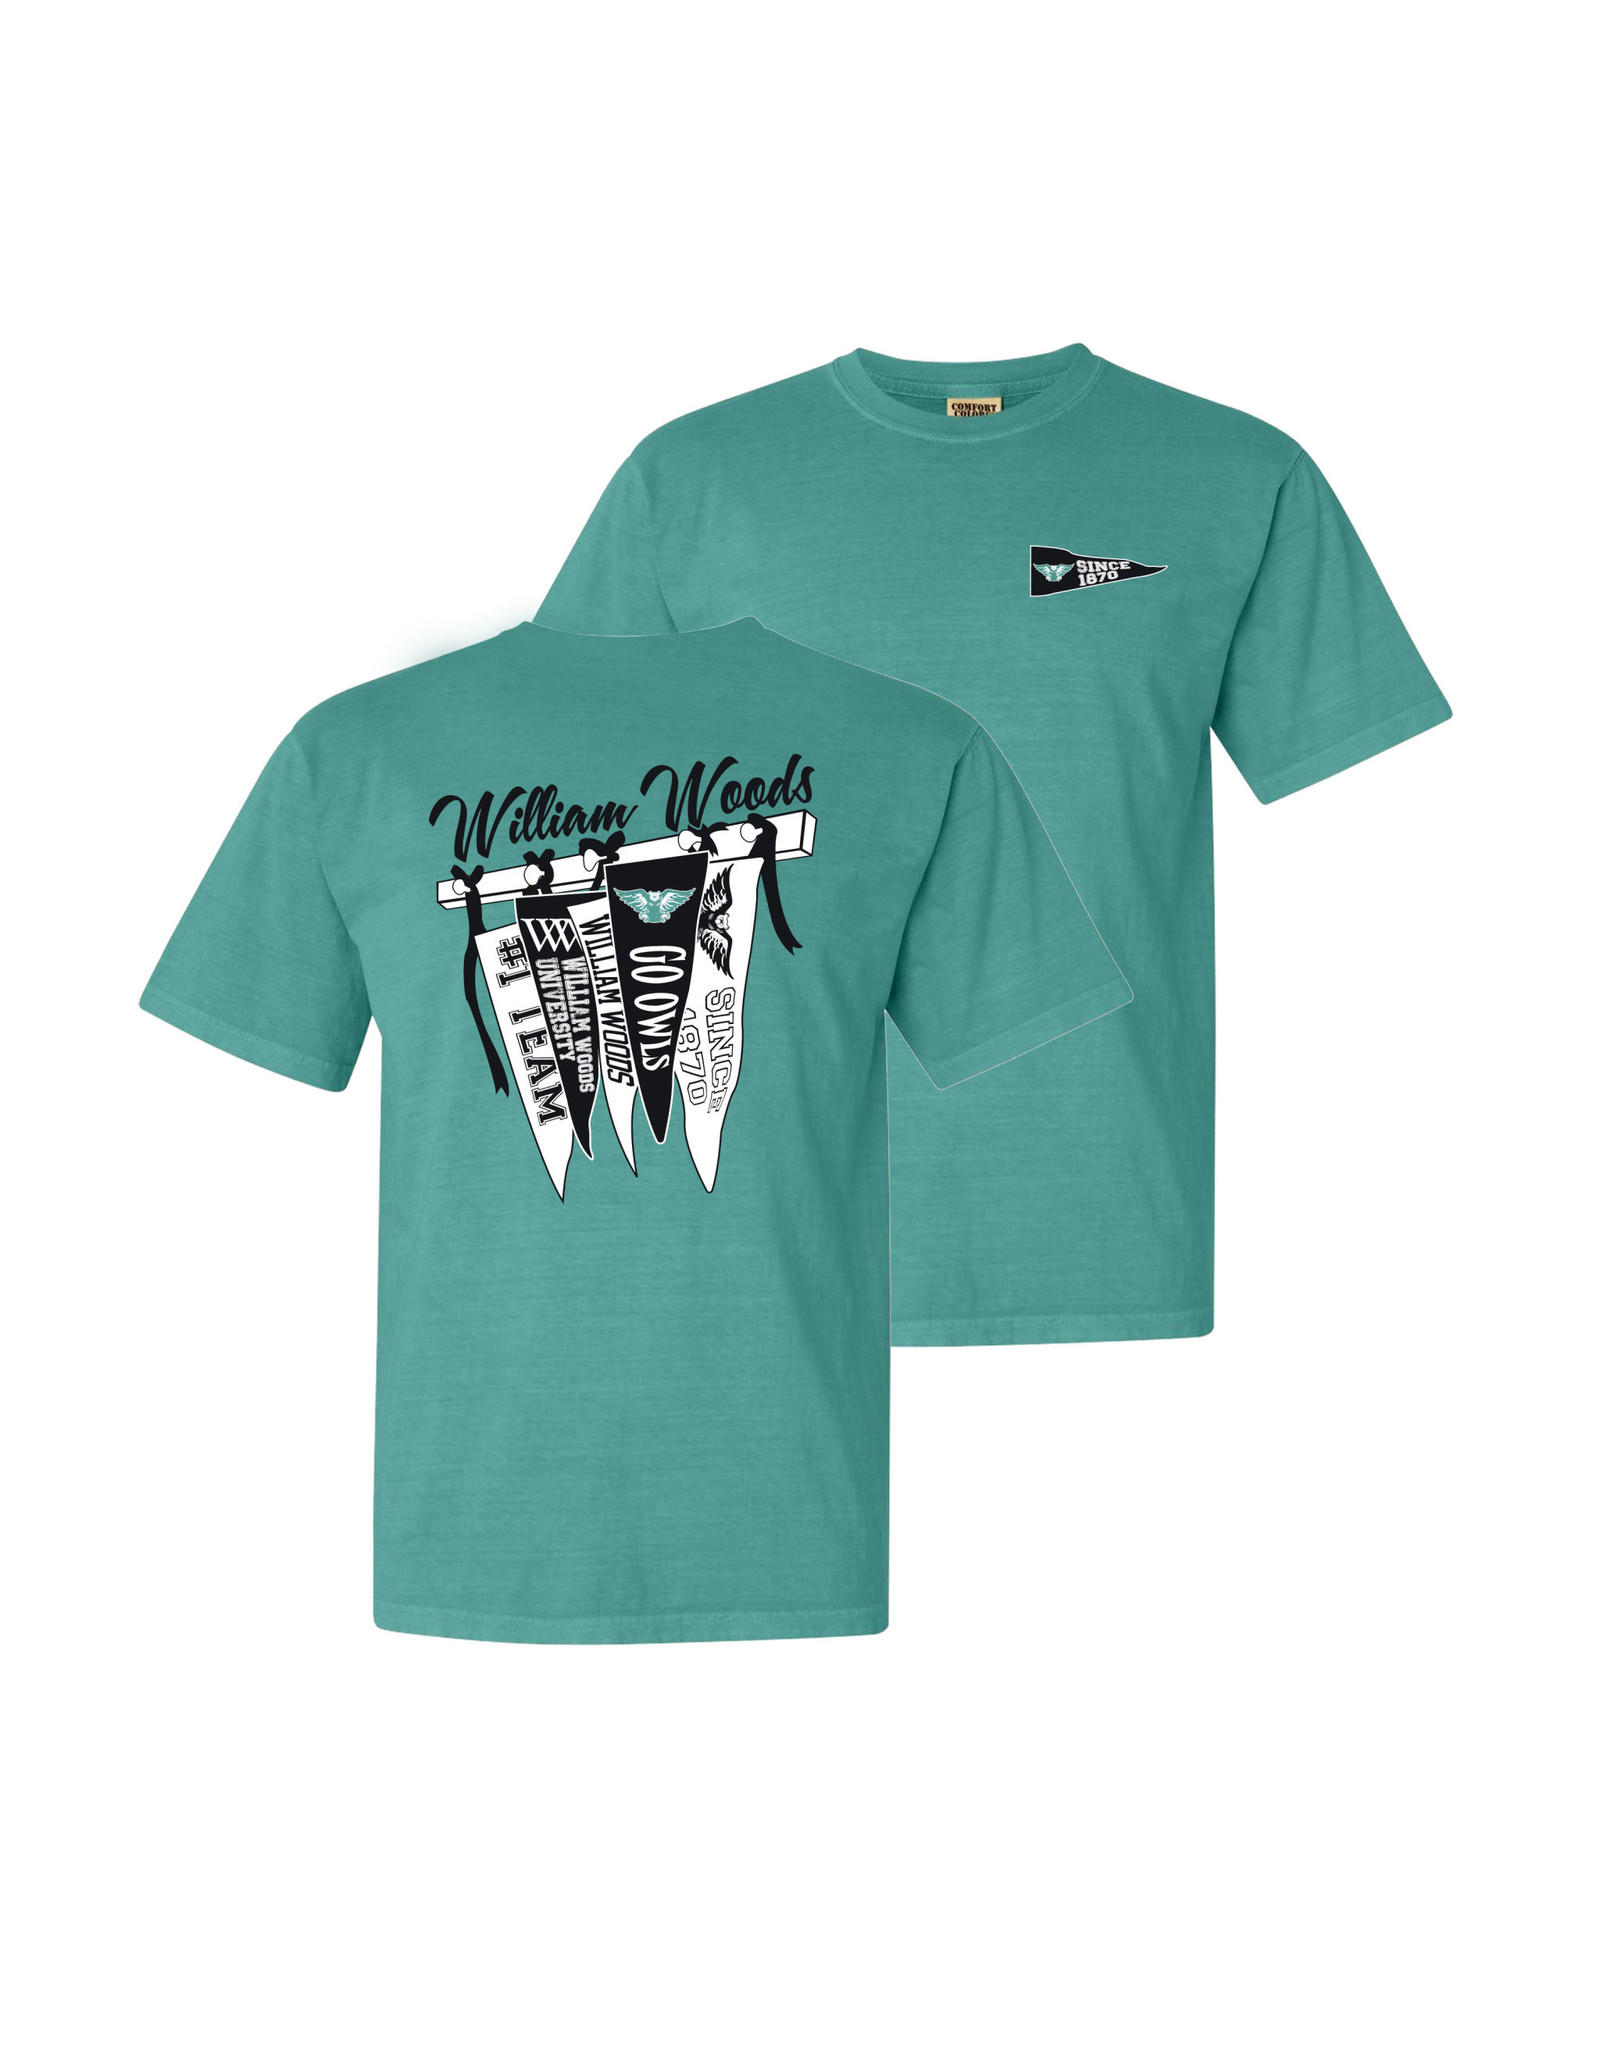 teal shirt front and back